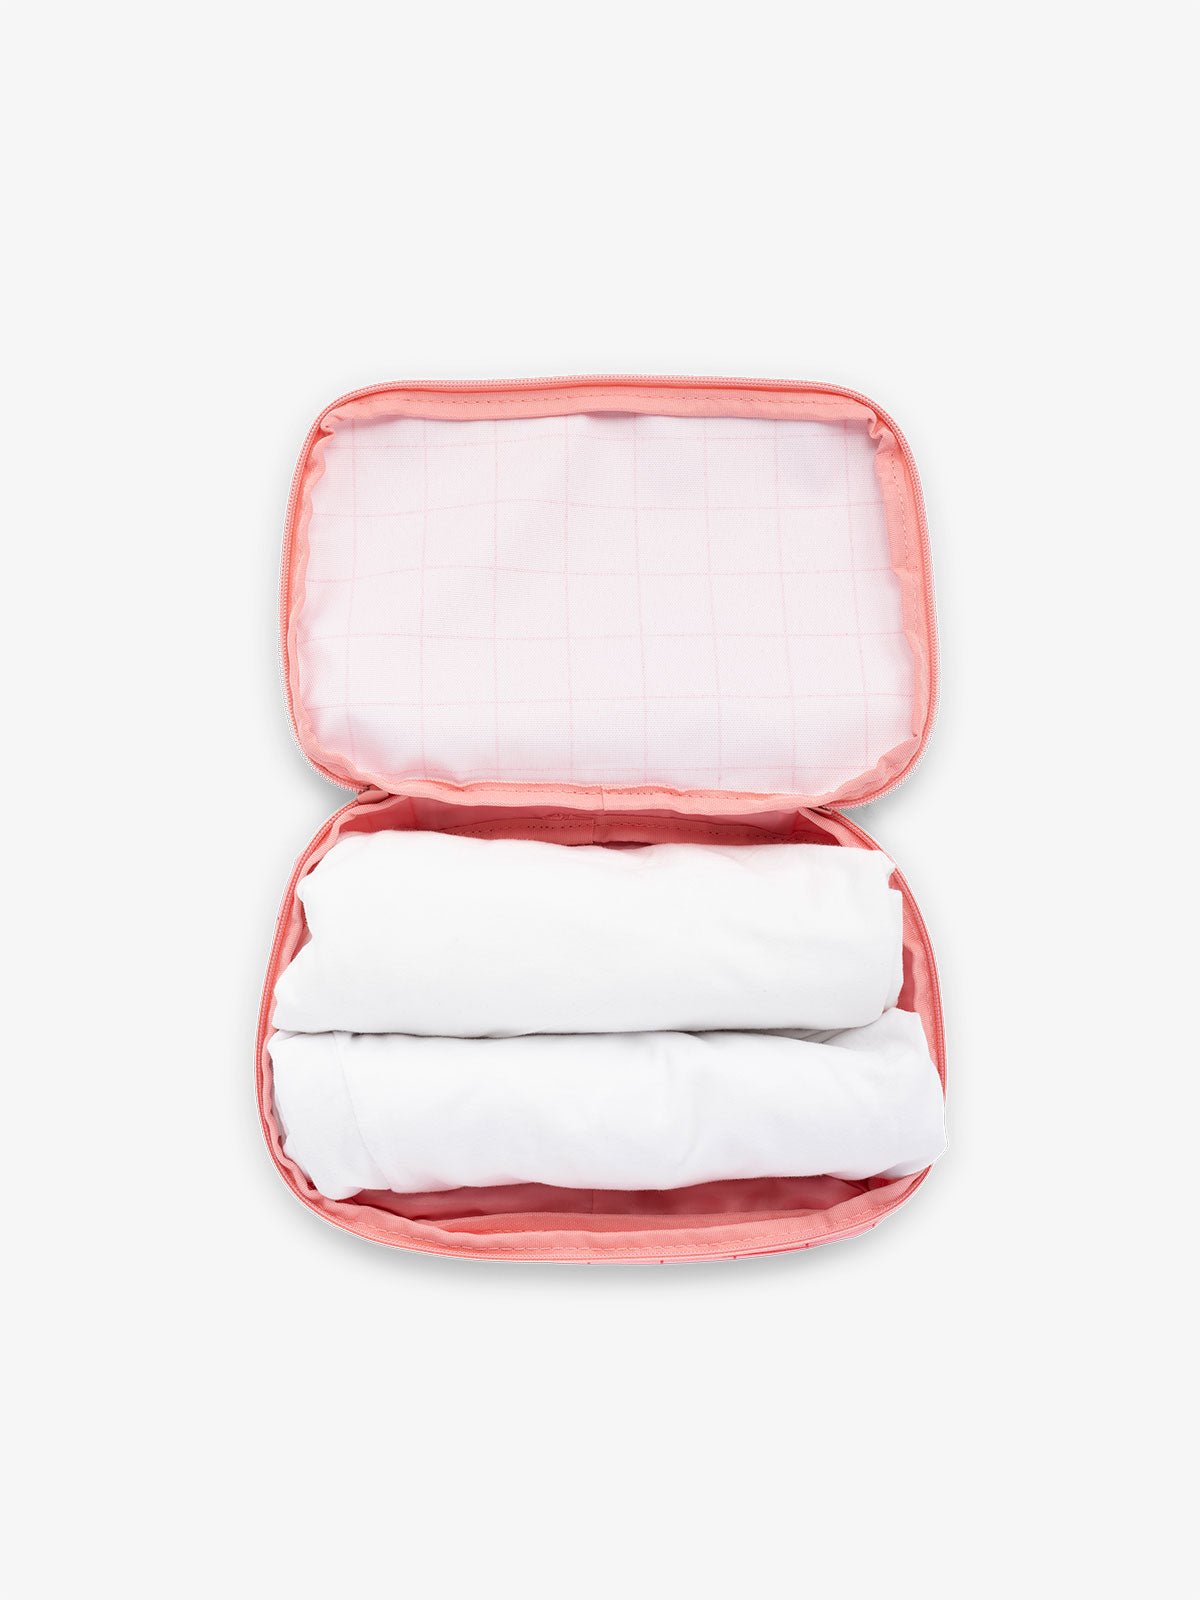 CALPAK small packing cubes for travel made with durable material in pink